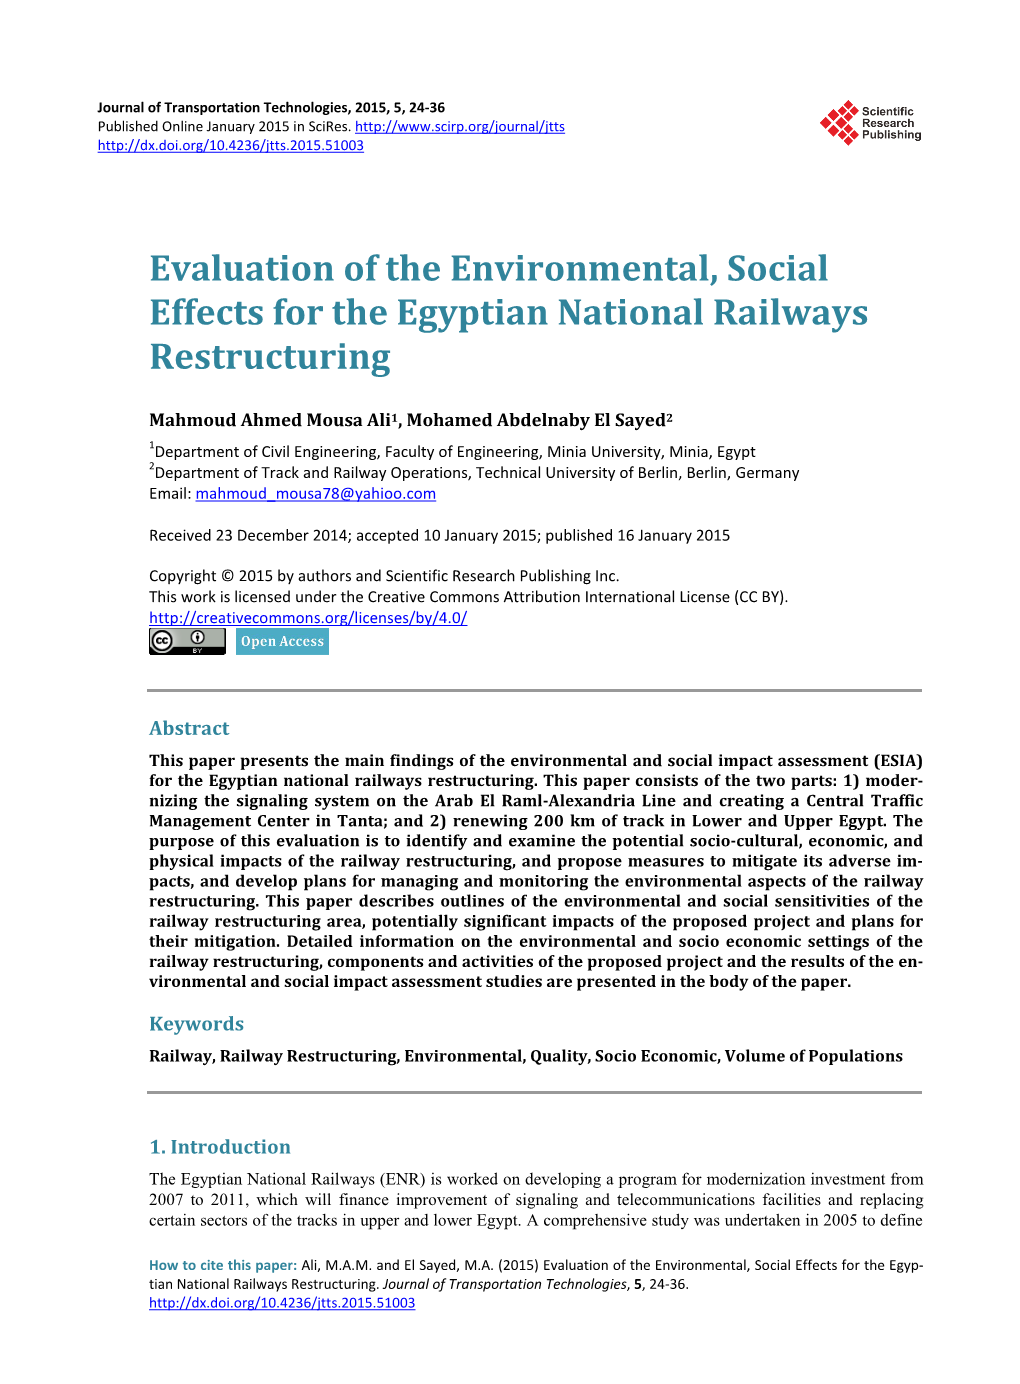 Evaluation of the Environmental, Social Effects for the Egyptian National Railways Restructuring